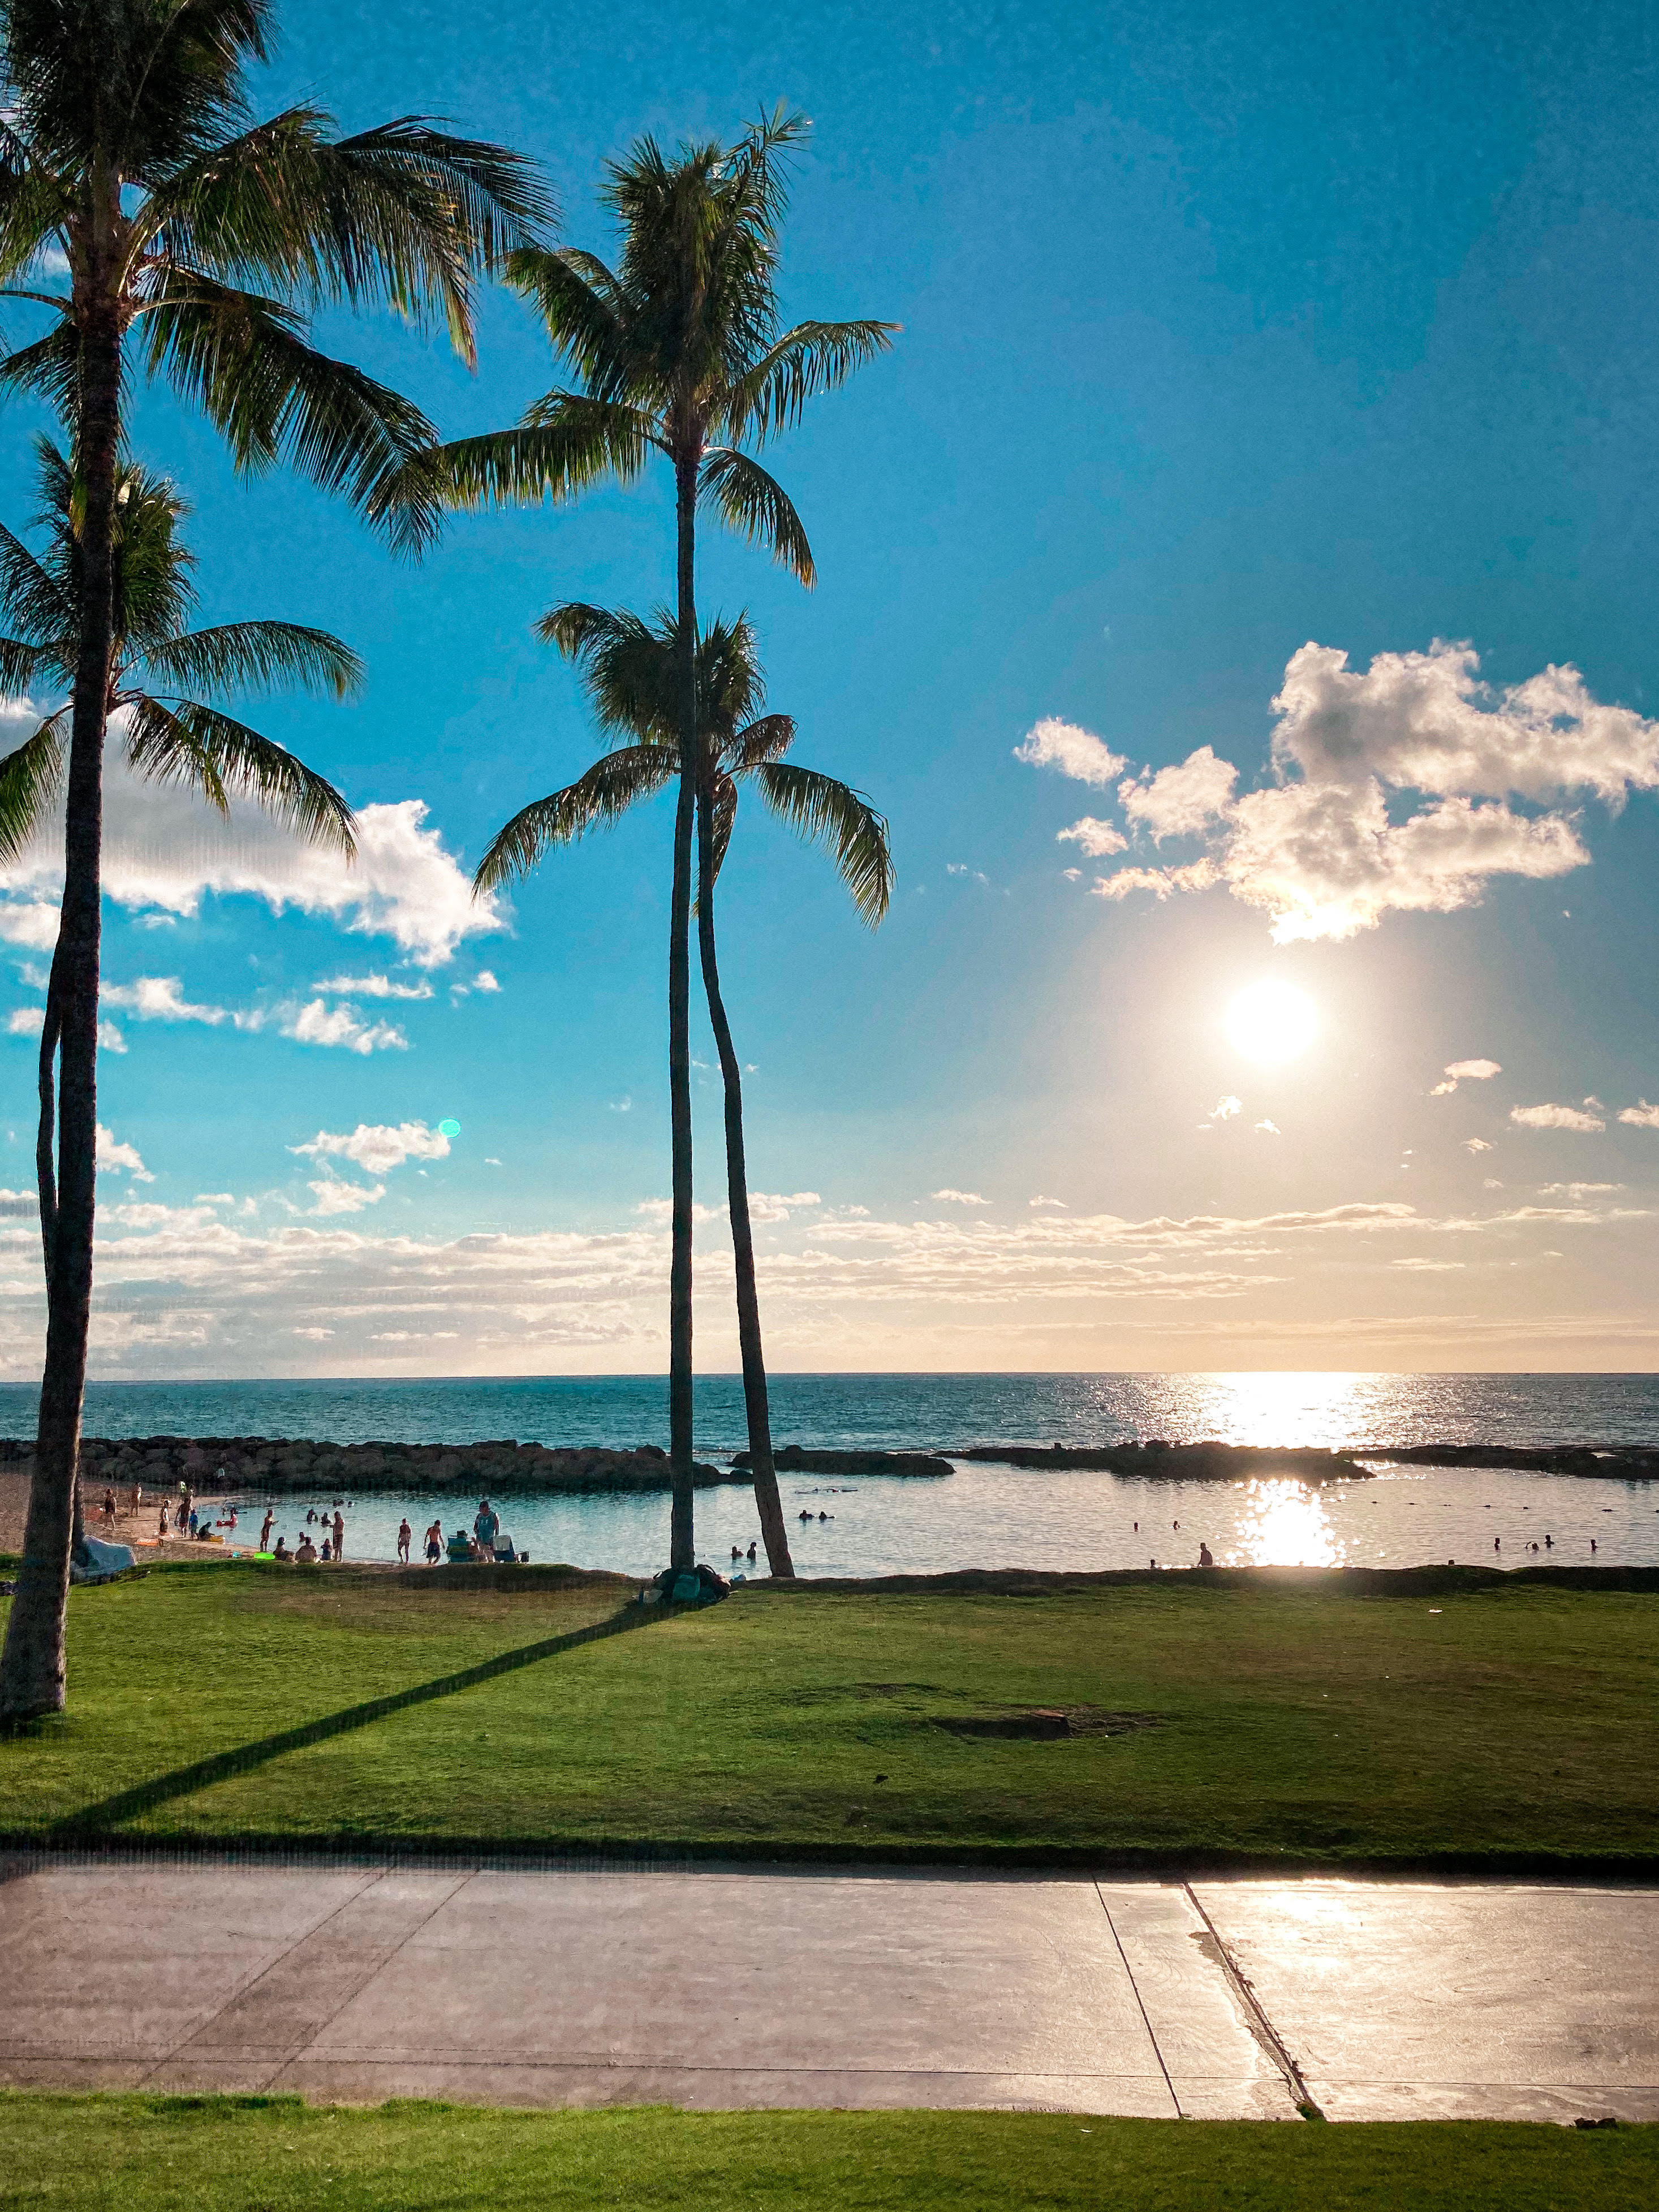 View of palm trees, grass, and ko olina lagoons in Oahu